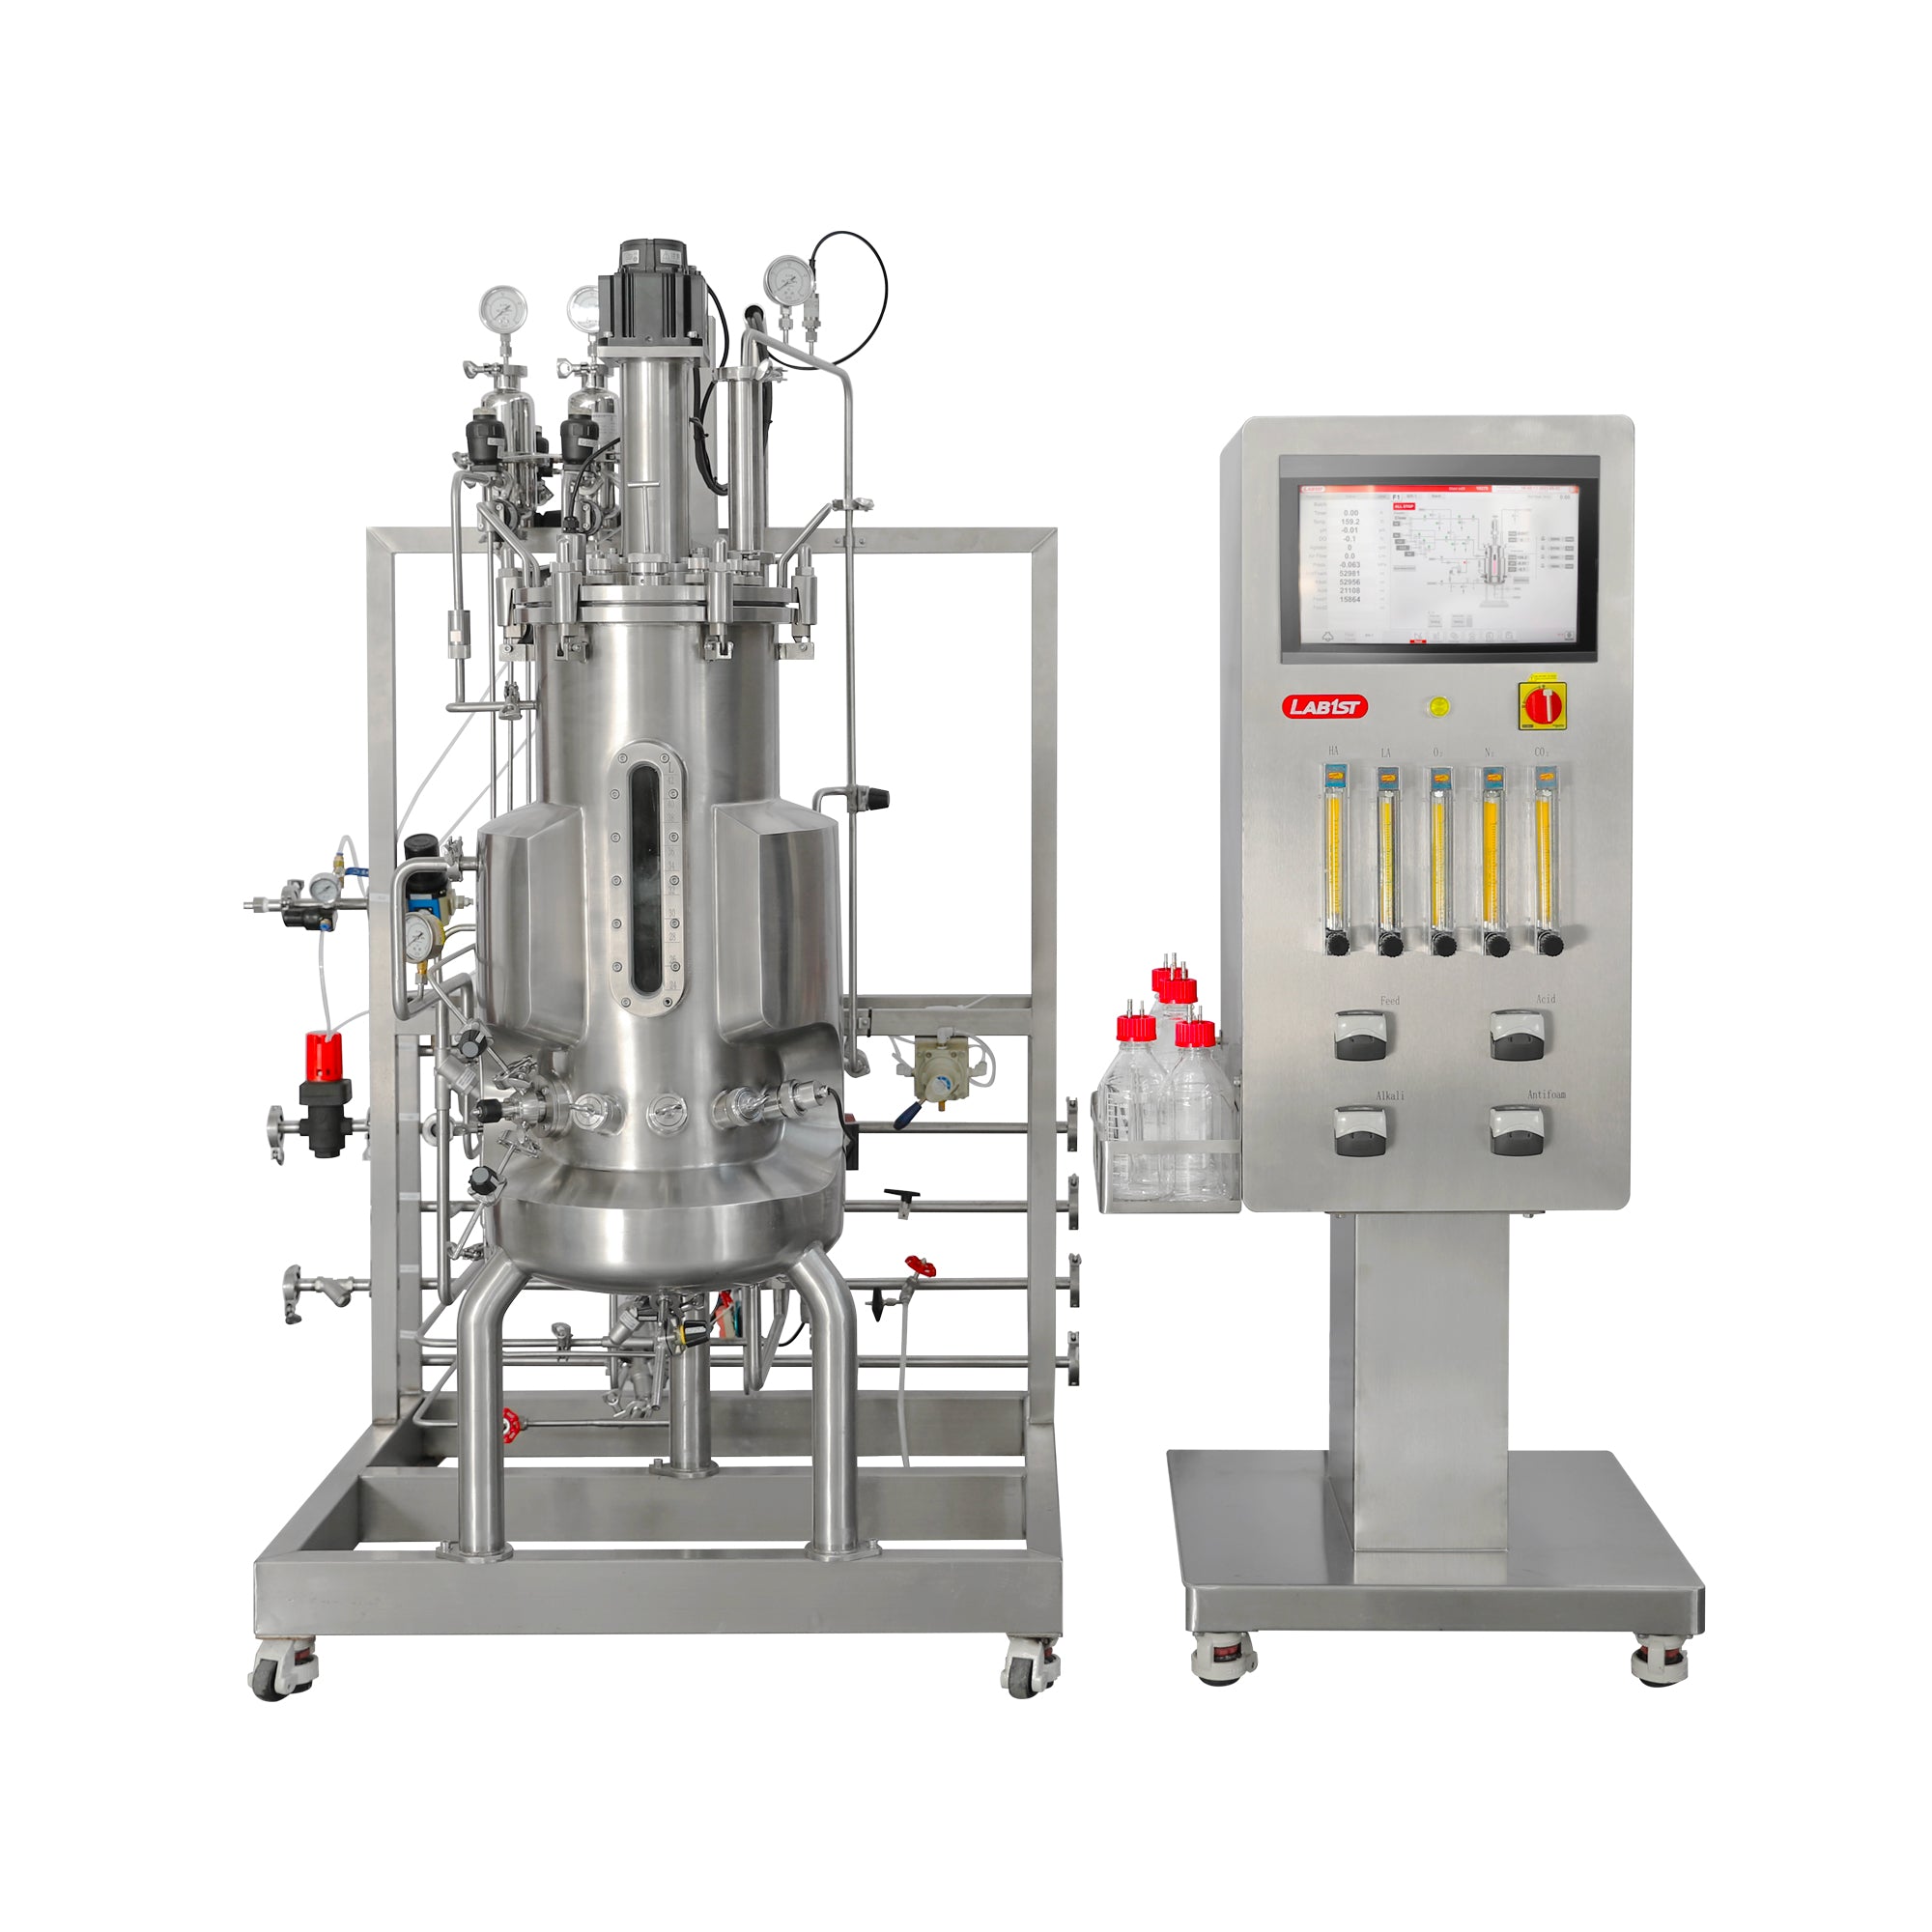 200L Stainless Steel Bioreactor for Microbial and Cell Culture BR500-C1